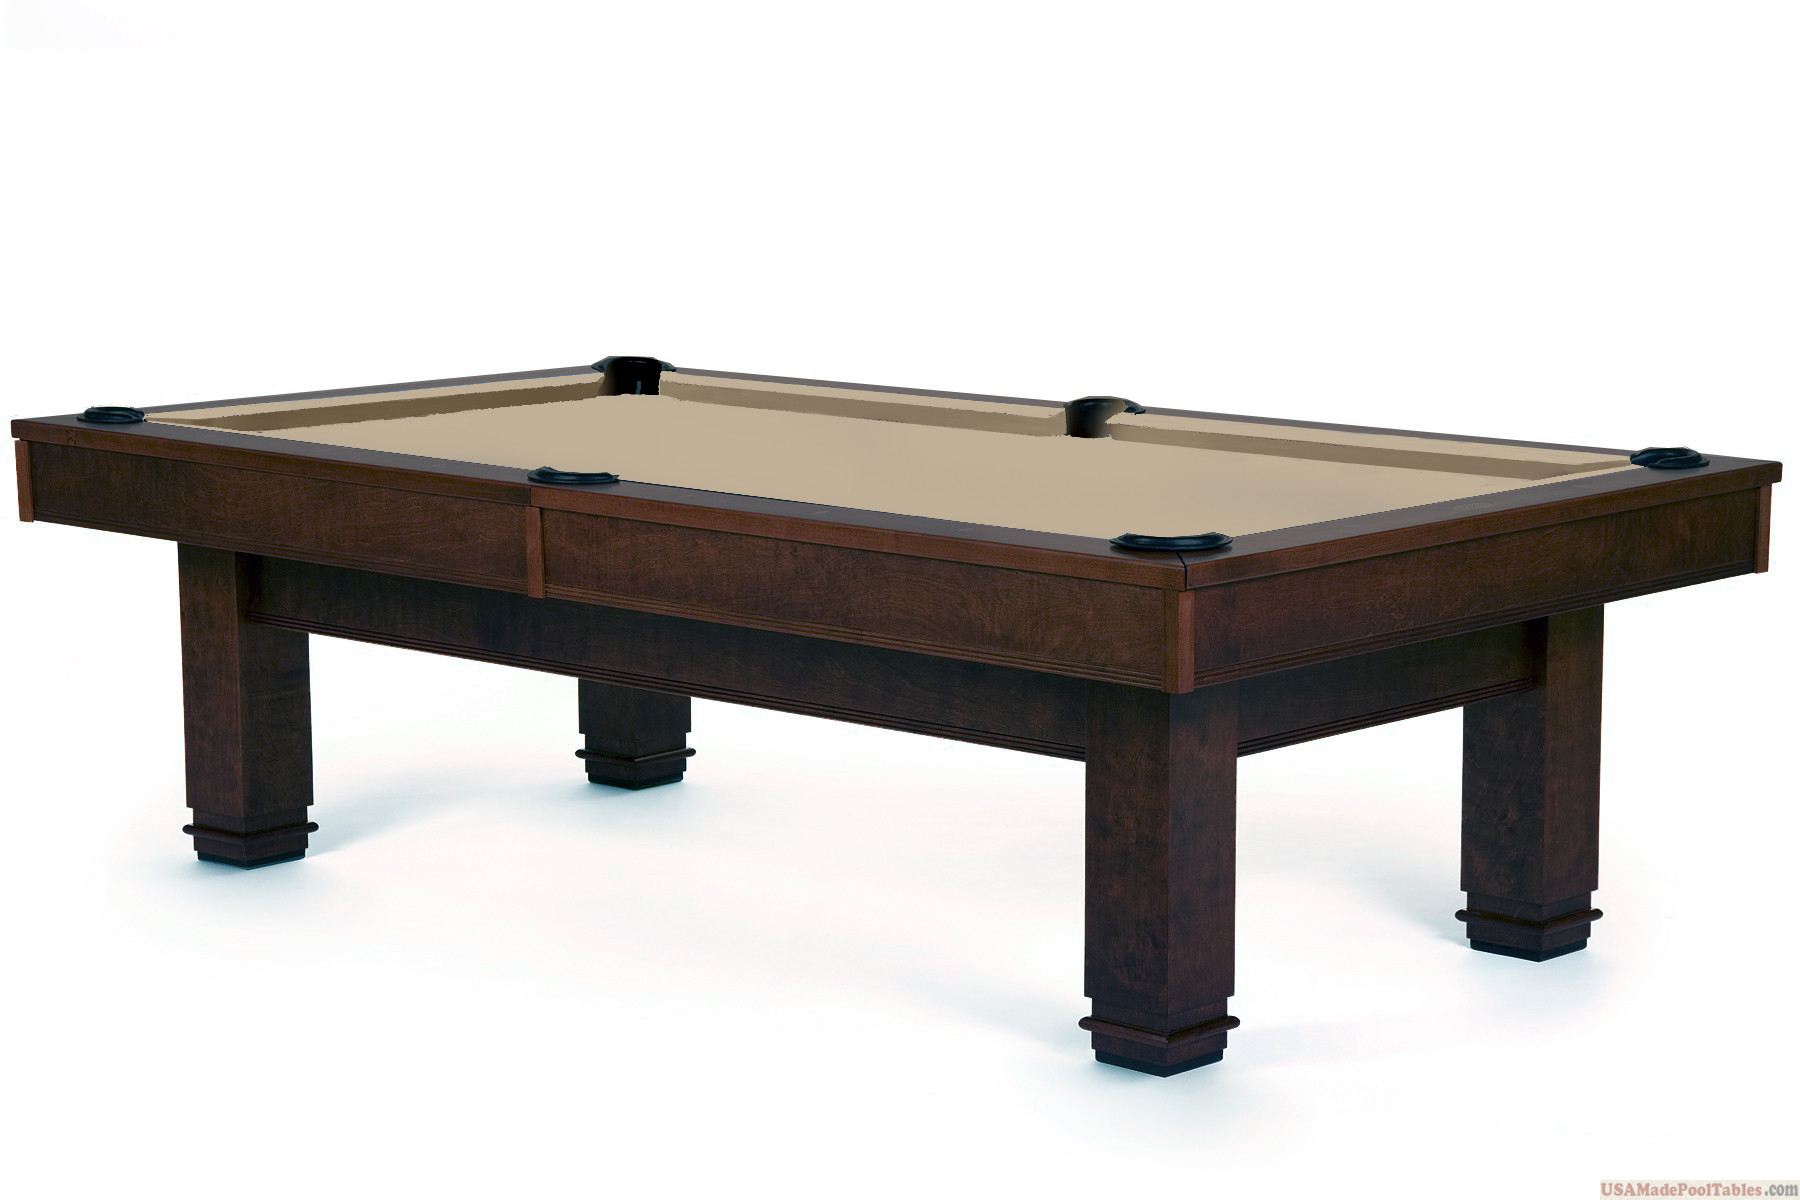 CLIMAX POOL TABLES AVAILABLE IN ANY STAIN FINISH